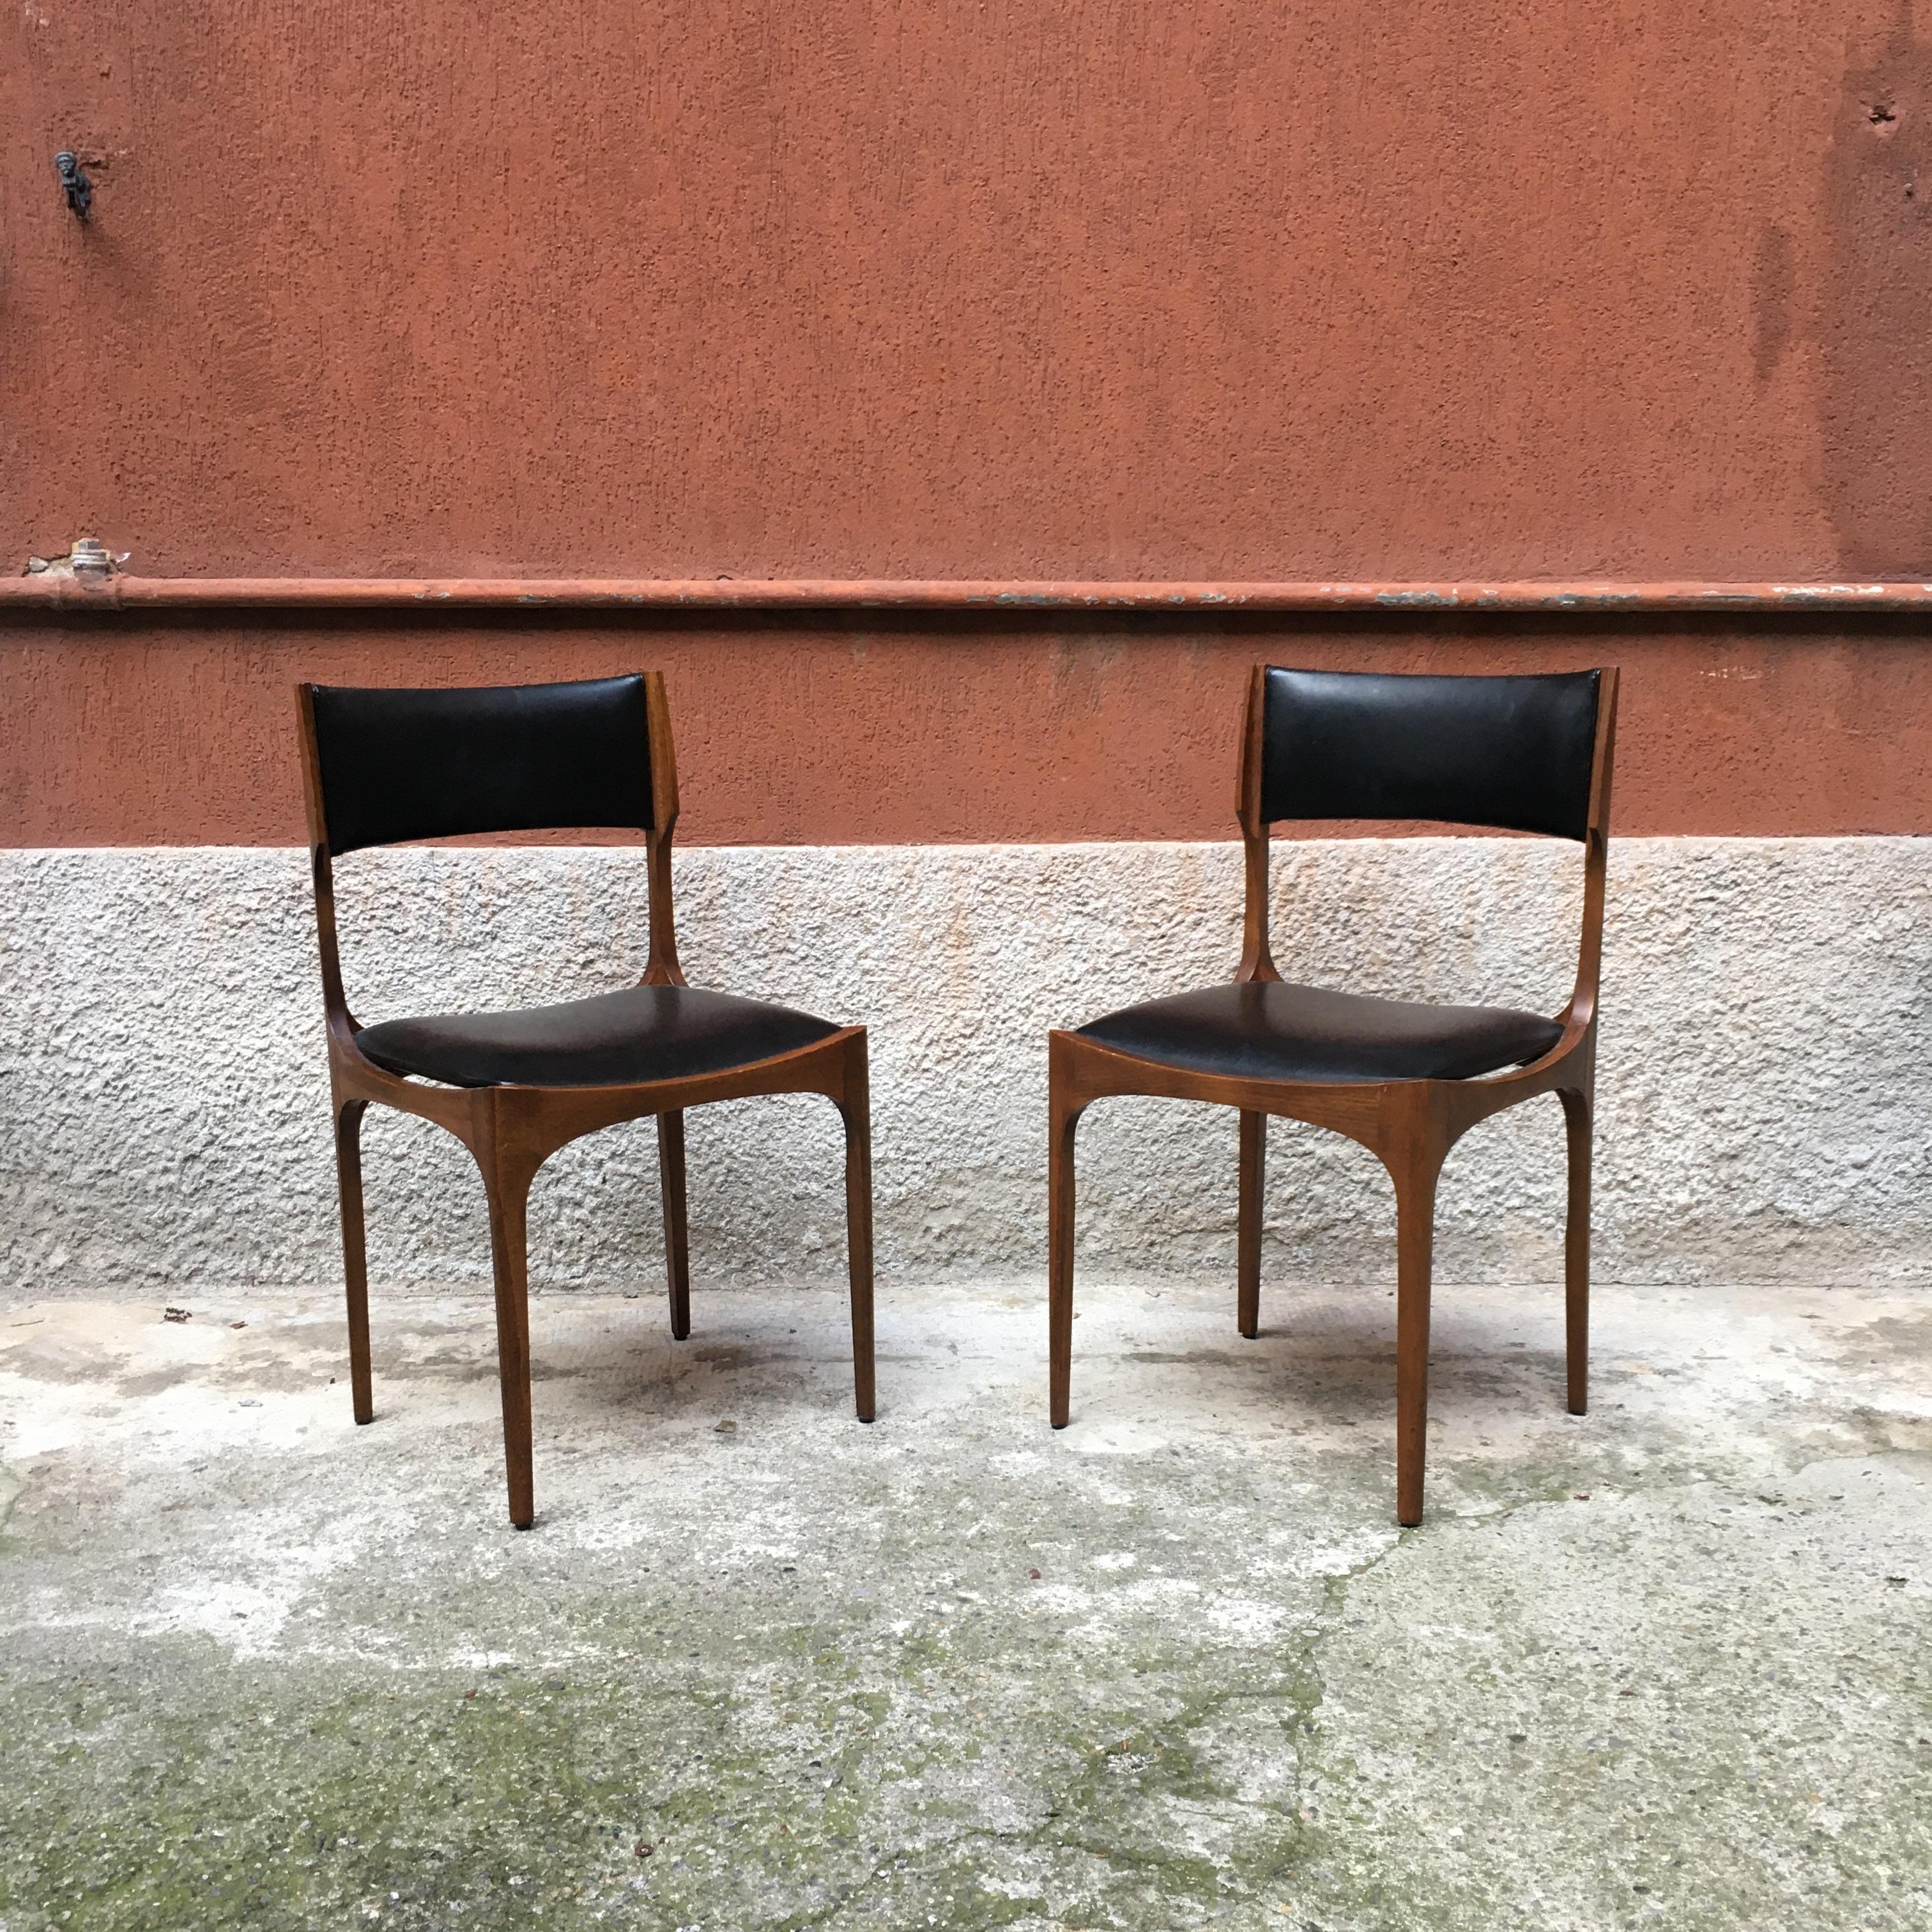 Italian beech and leather Elisabetta chairs by Gibellini for Sormani, 1963 Elisabetta chairs with beech wood structure and seat and back in vinyl leather Design by Giuseppe Gibellini and produced by Sormani since 1963 Very good condition.